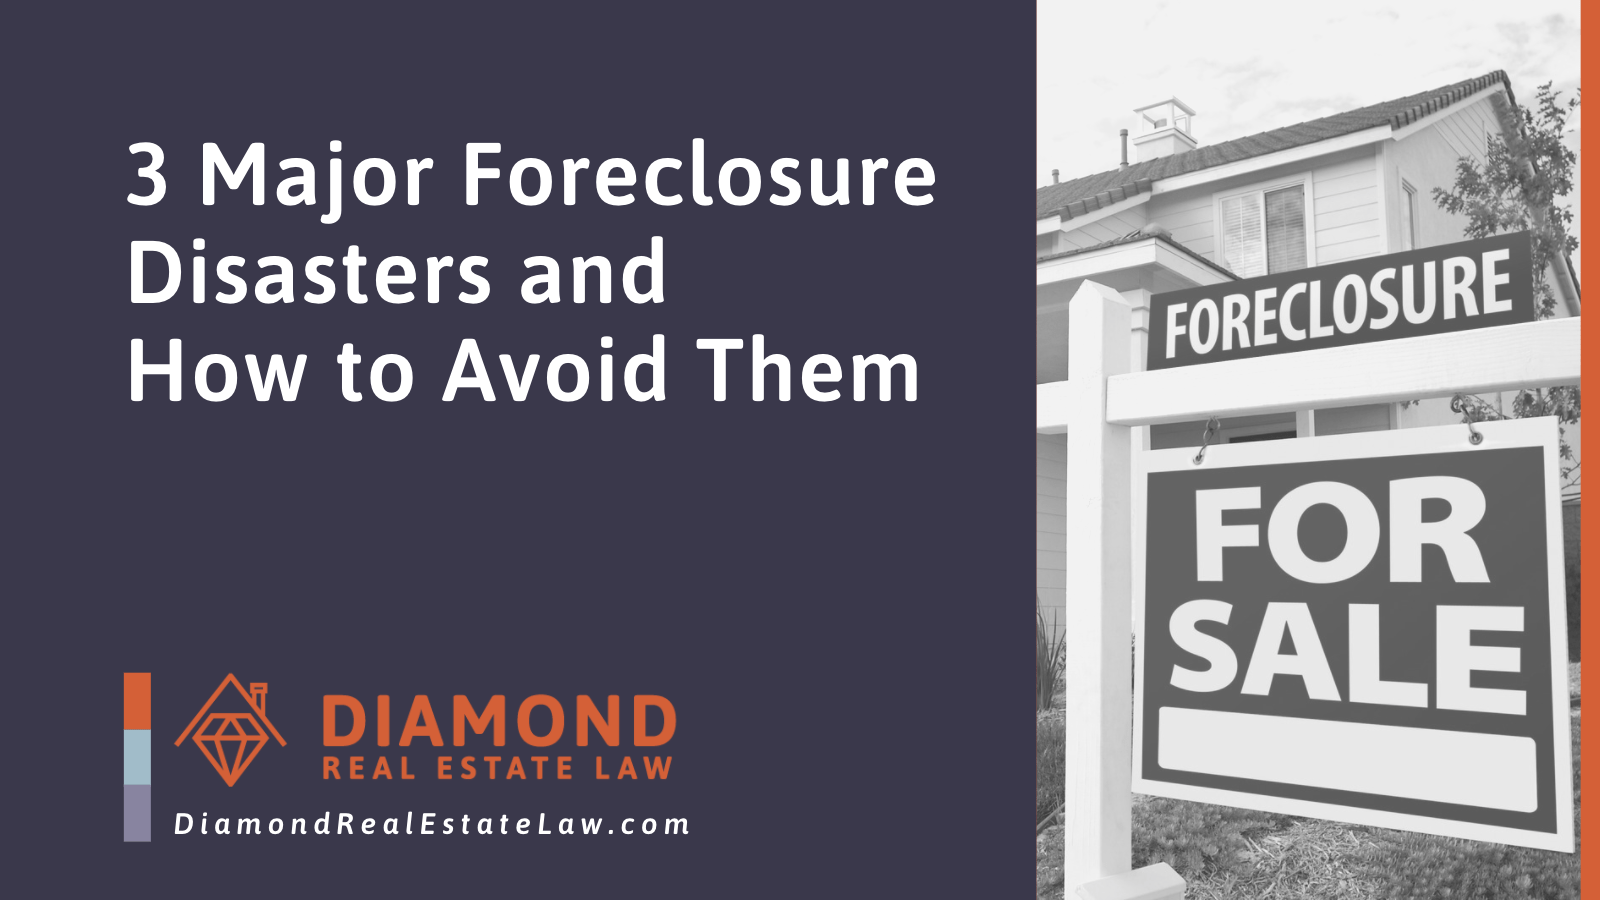 Major Foreclosure Disasters and How to Avoid Them - Diamond Real Estate Law | McHenry, IL Residential Real Estate Lawyer